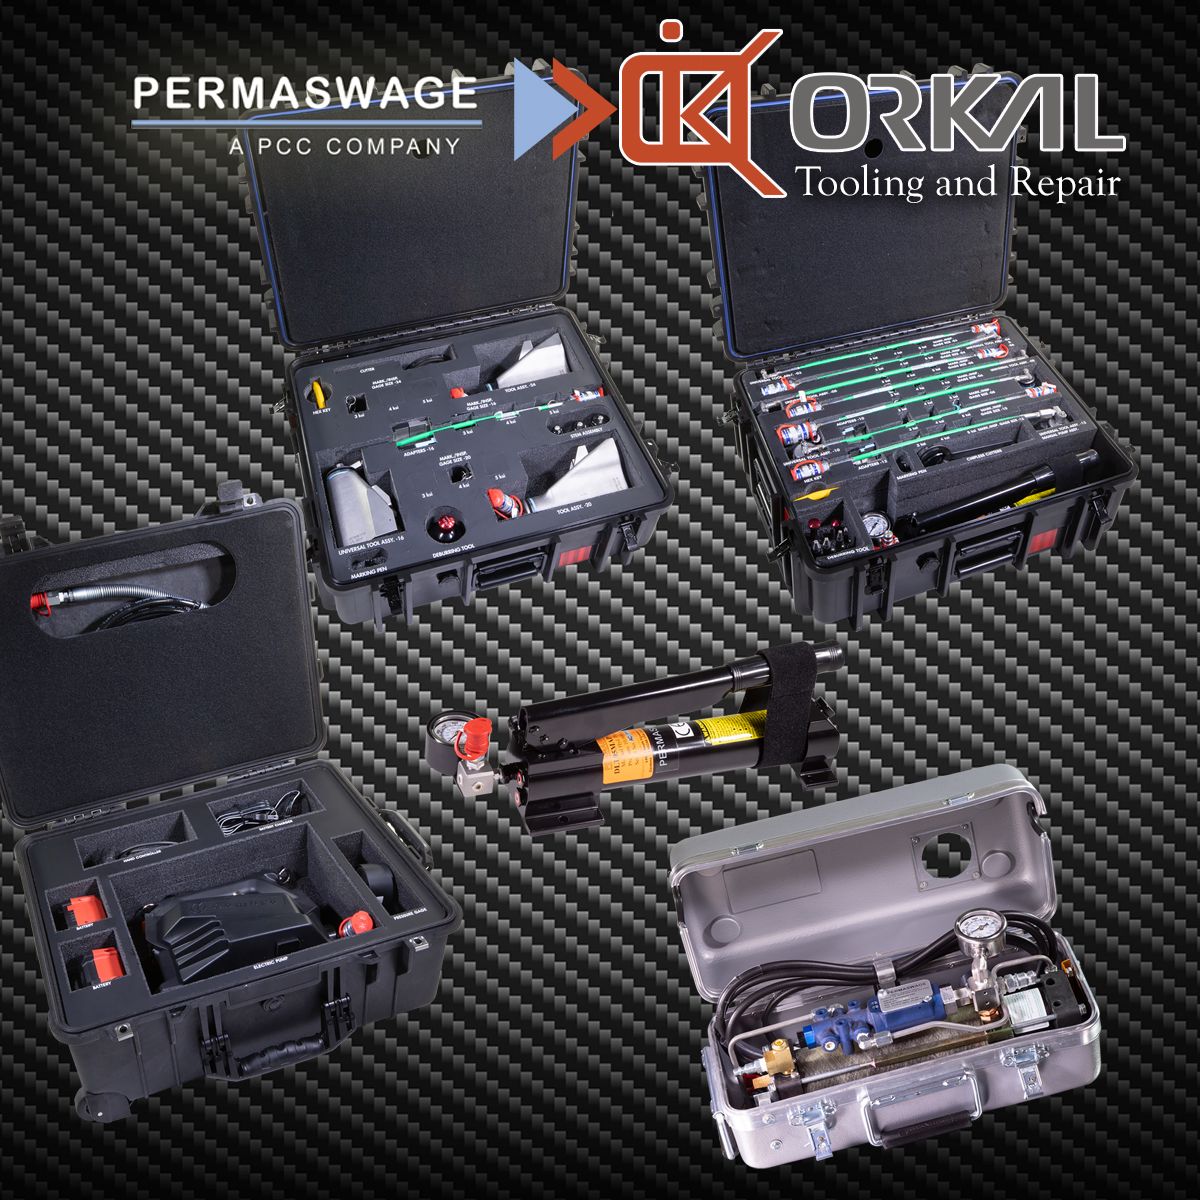 various professional auto draft tool kits from permaswage and okval, displayed open and closed, showcasing tools like wrenches and fittings on a patterned background.